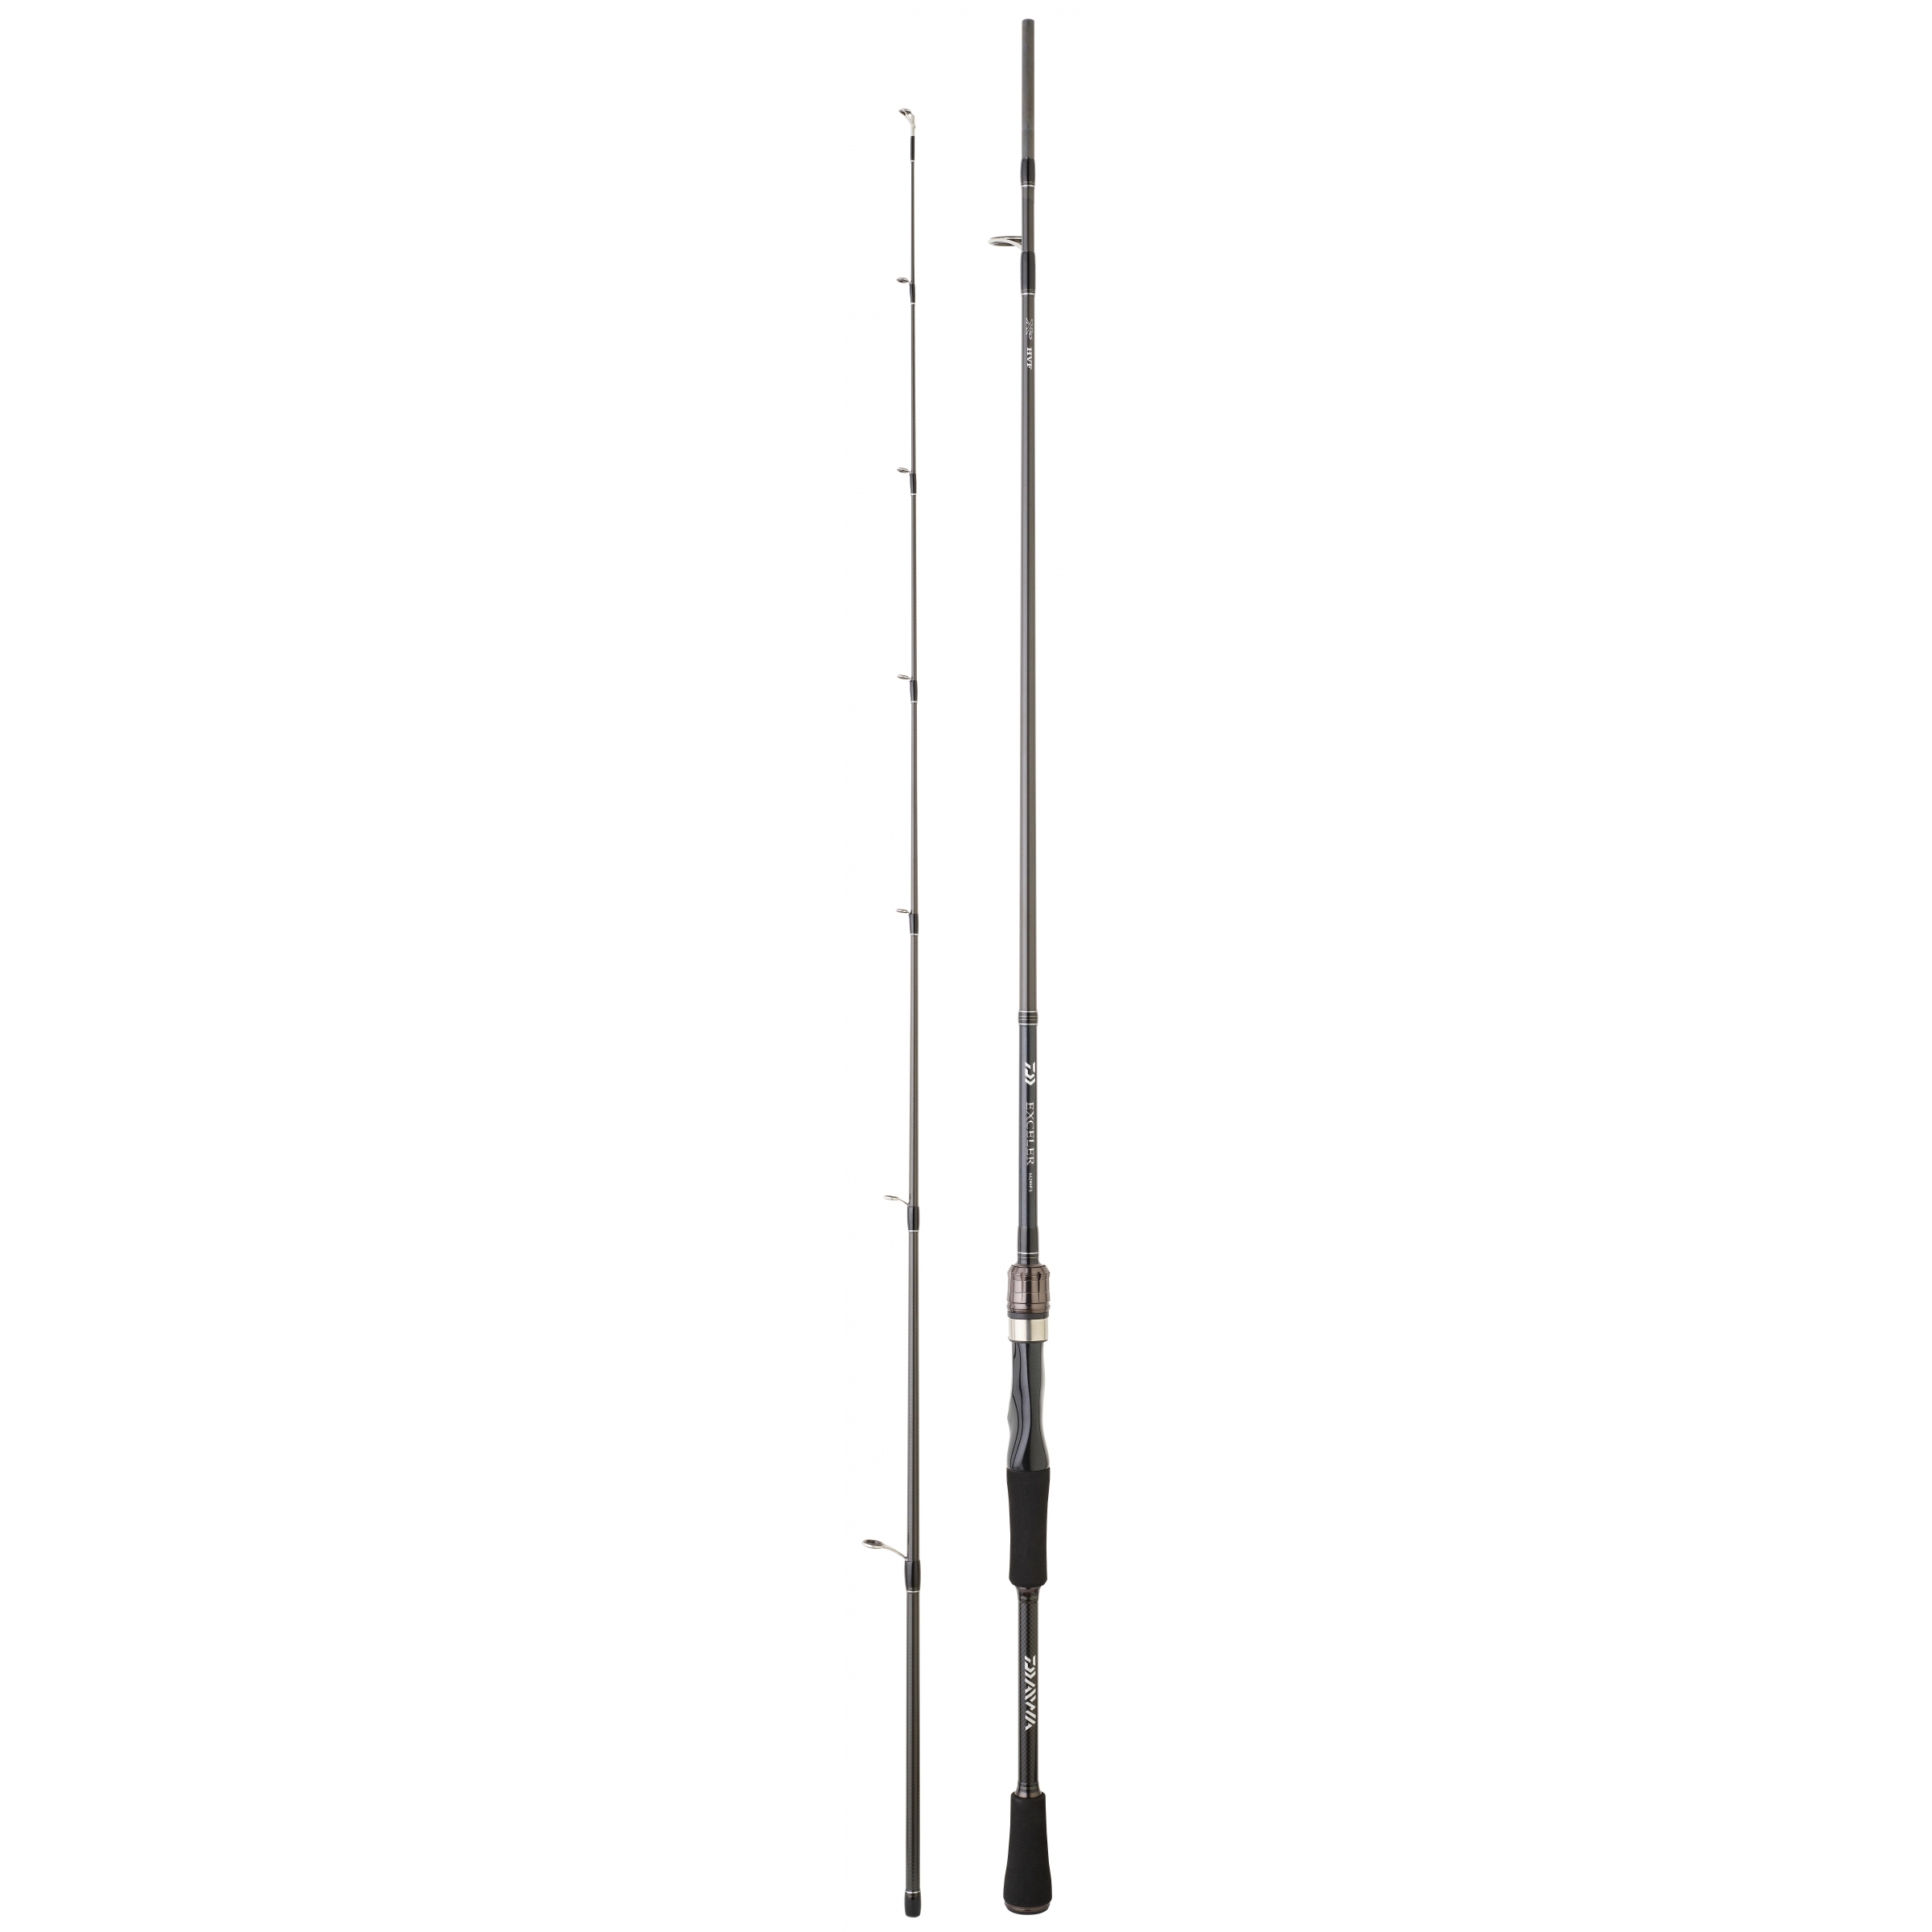 Canne spinning Daiwa Exceler Spinning 662 MHFS